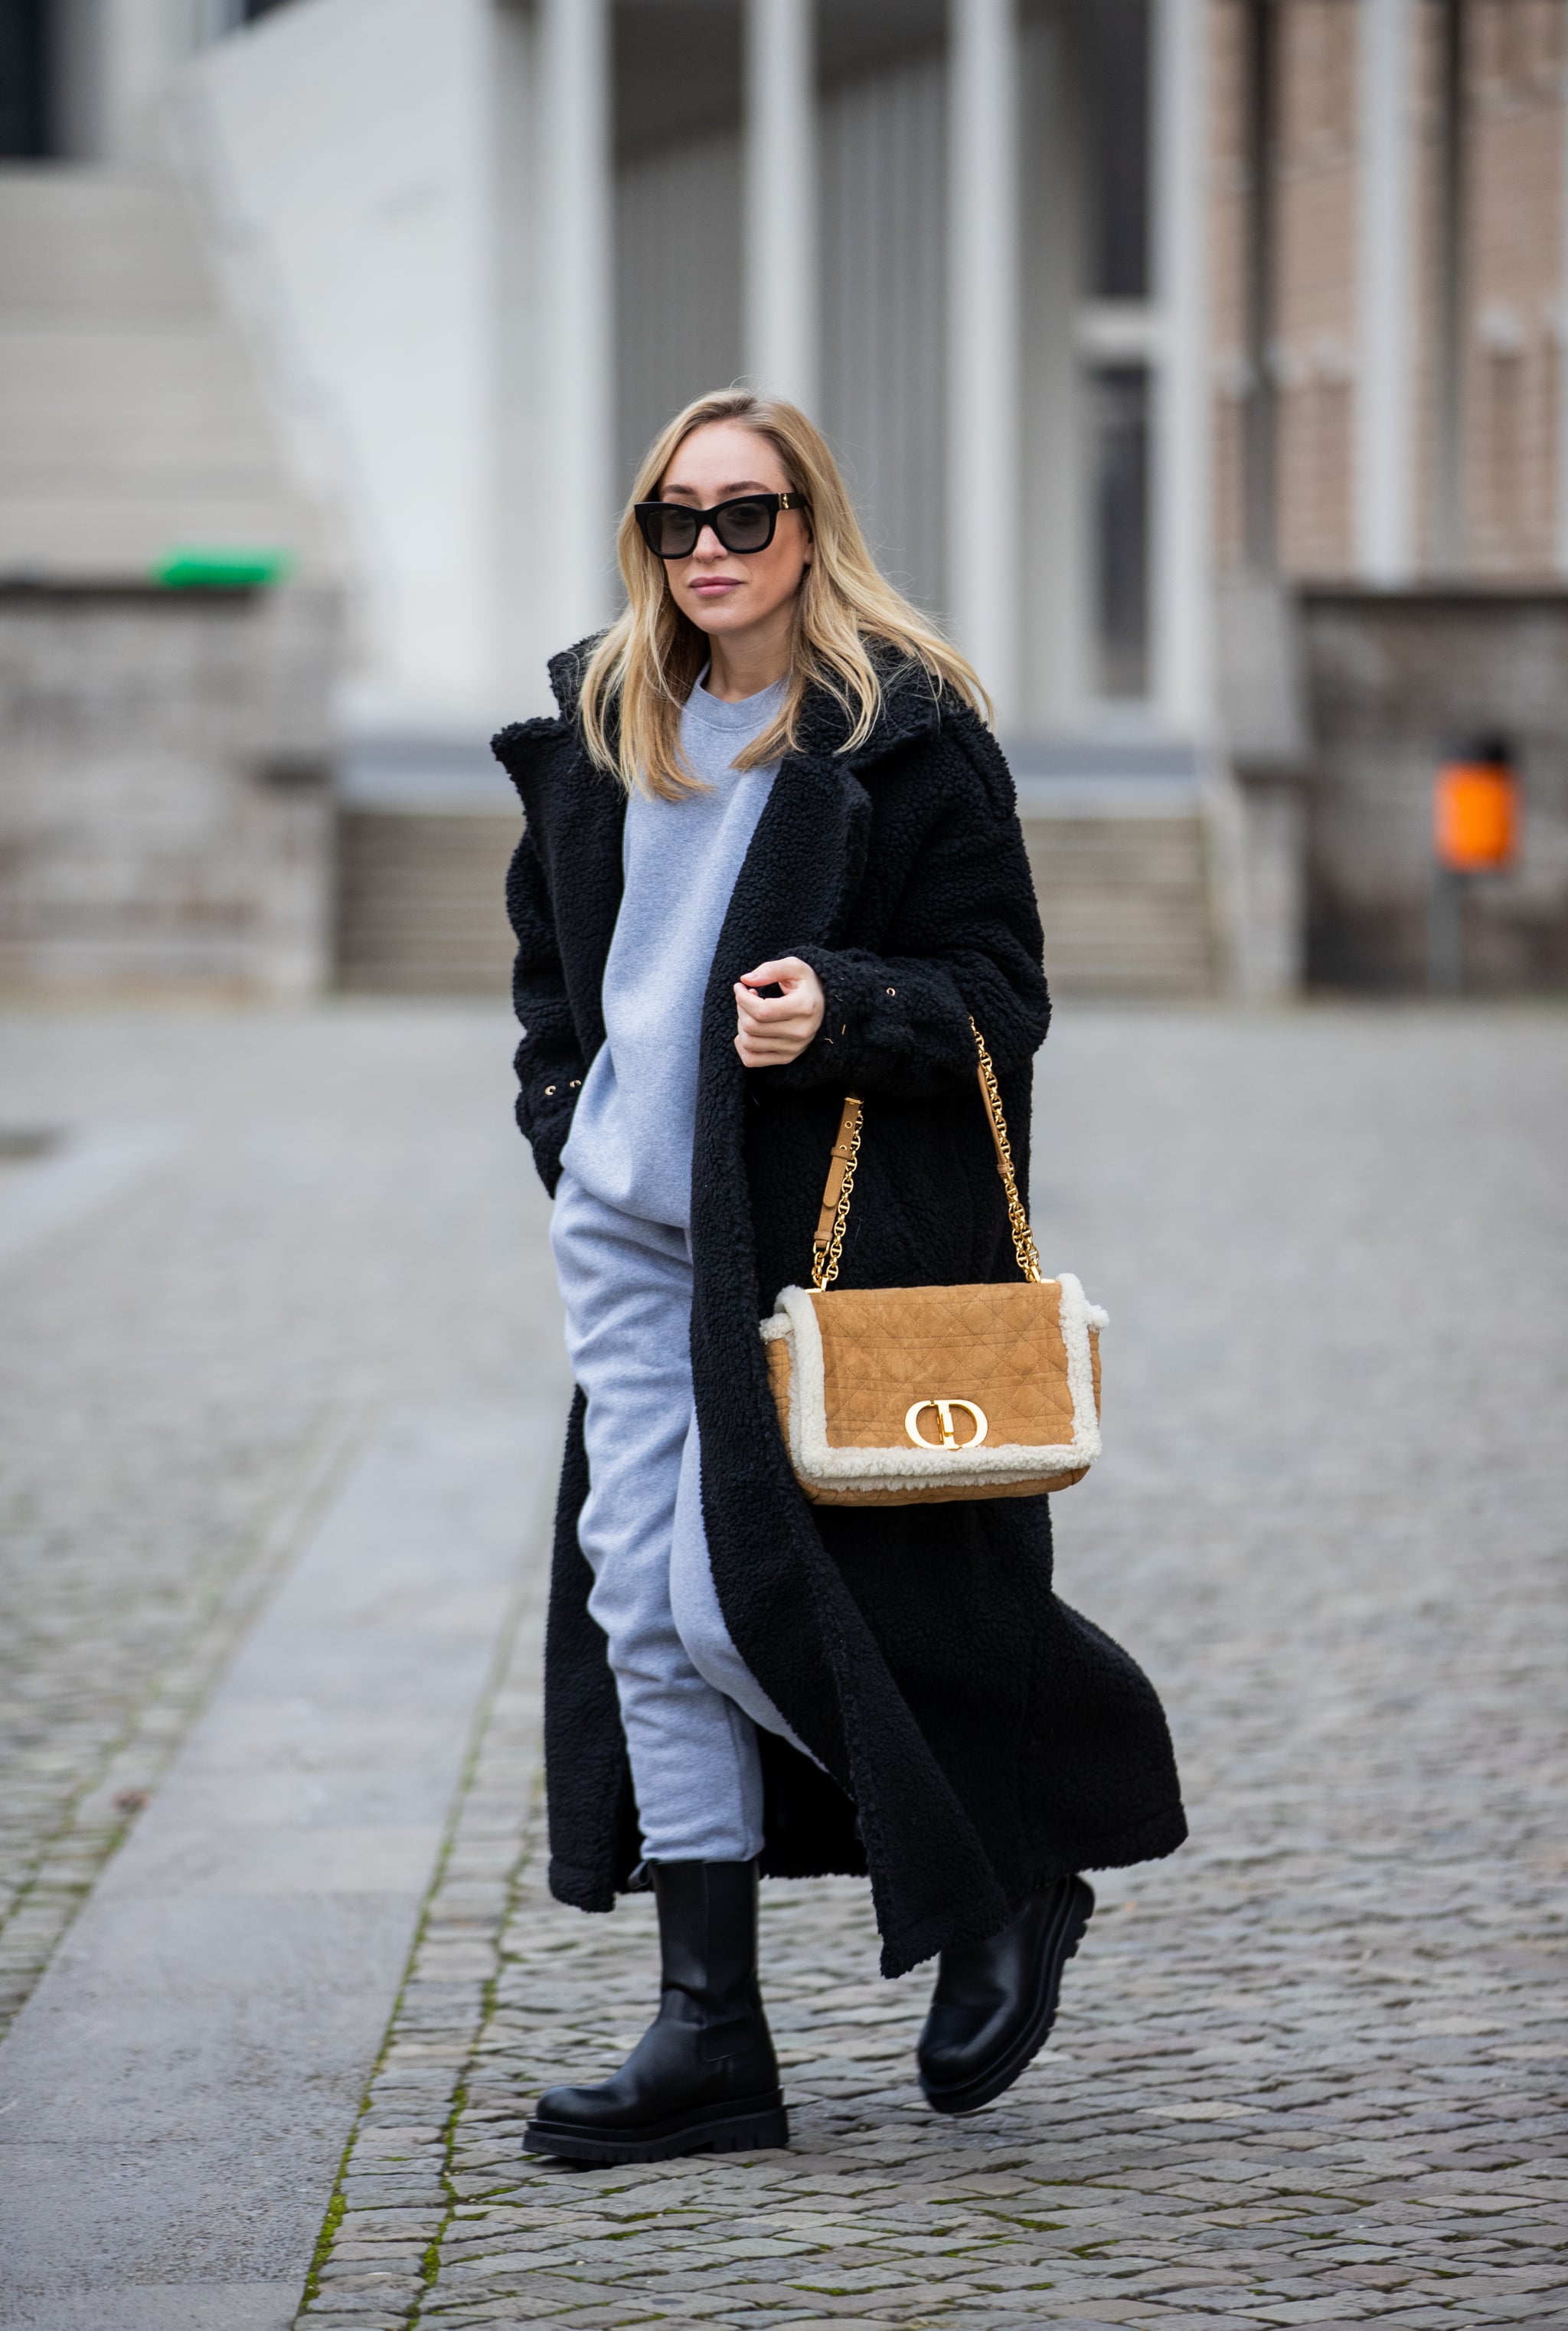 3 CHIC Street Style Outfits To Copy This Winter — WOAHSTYLE